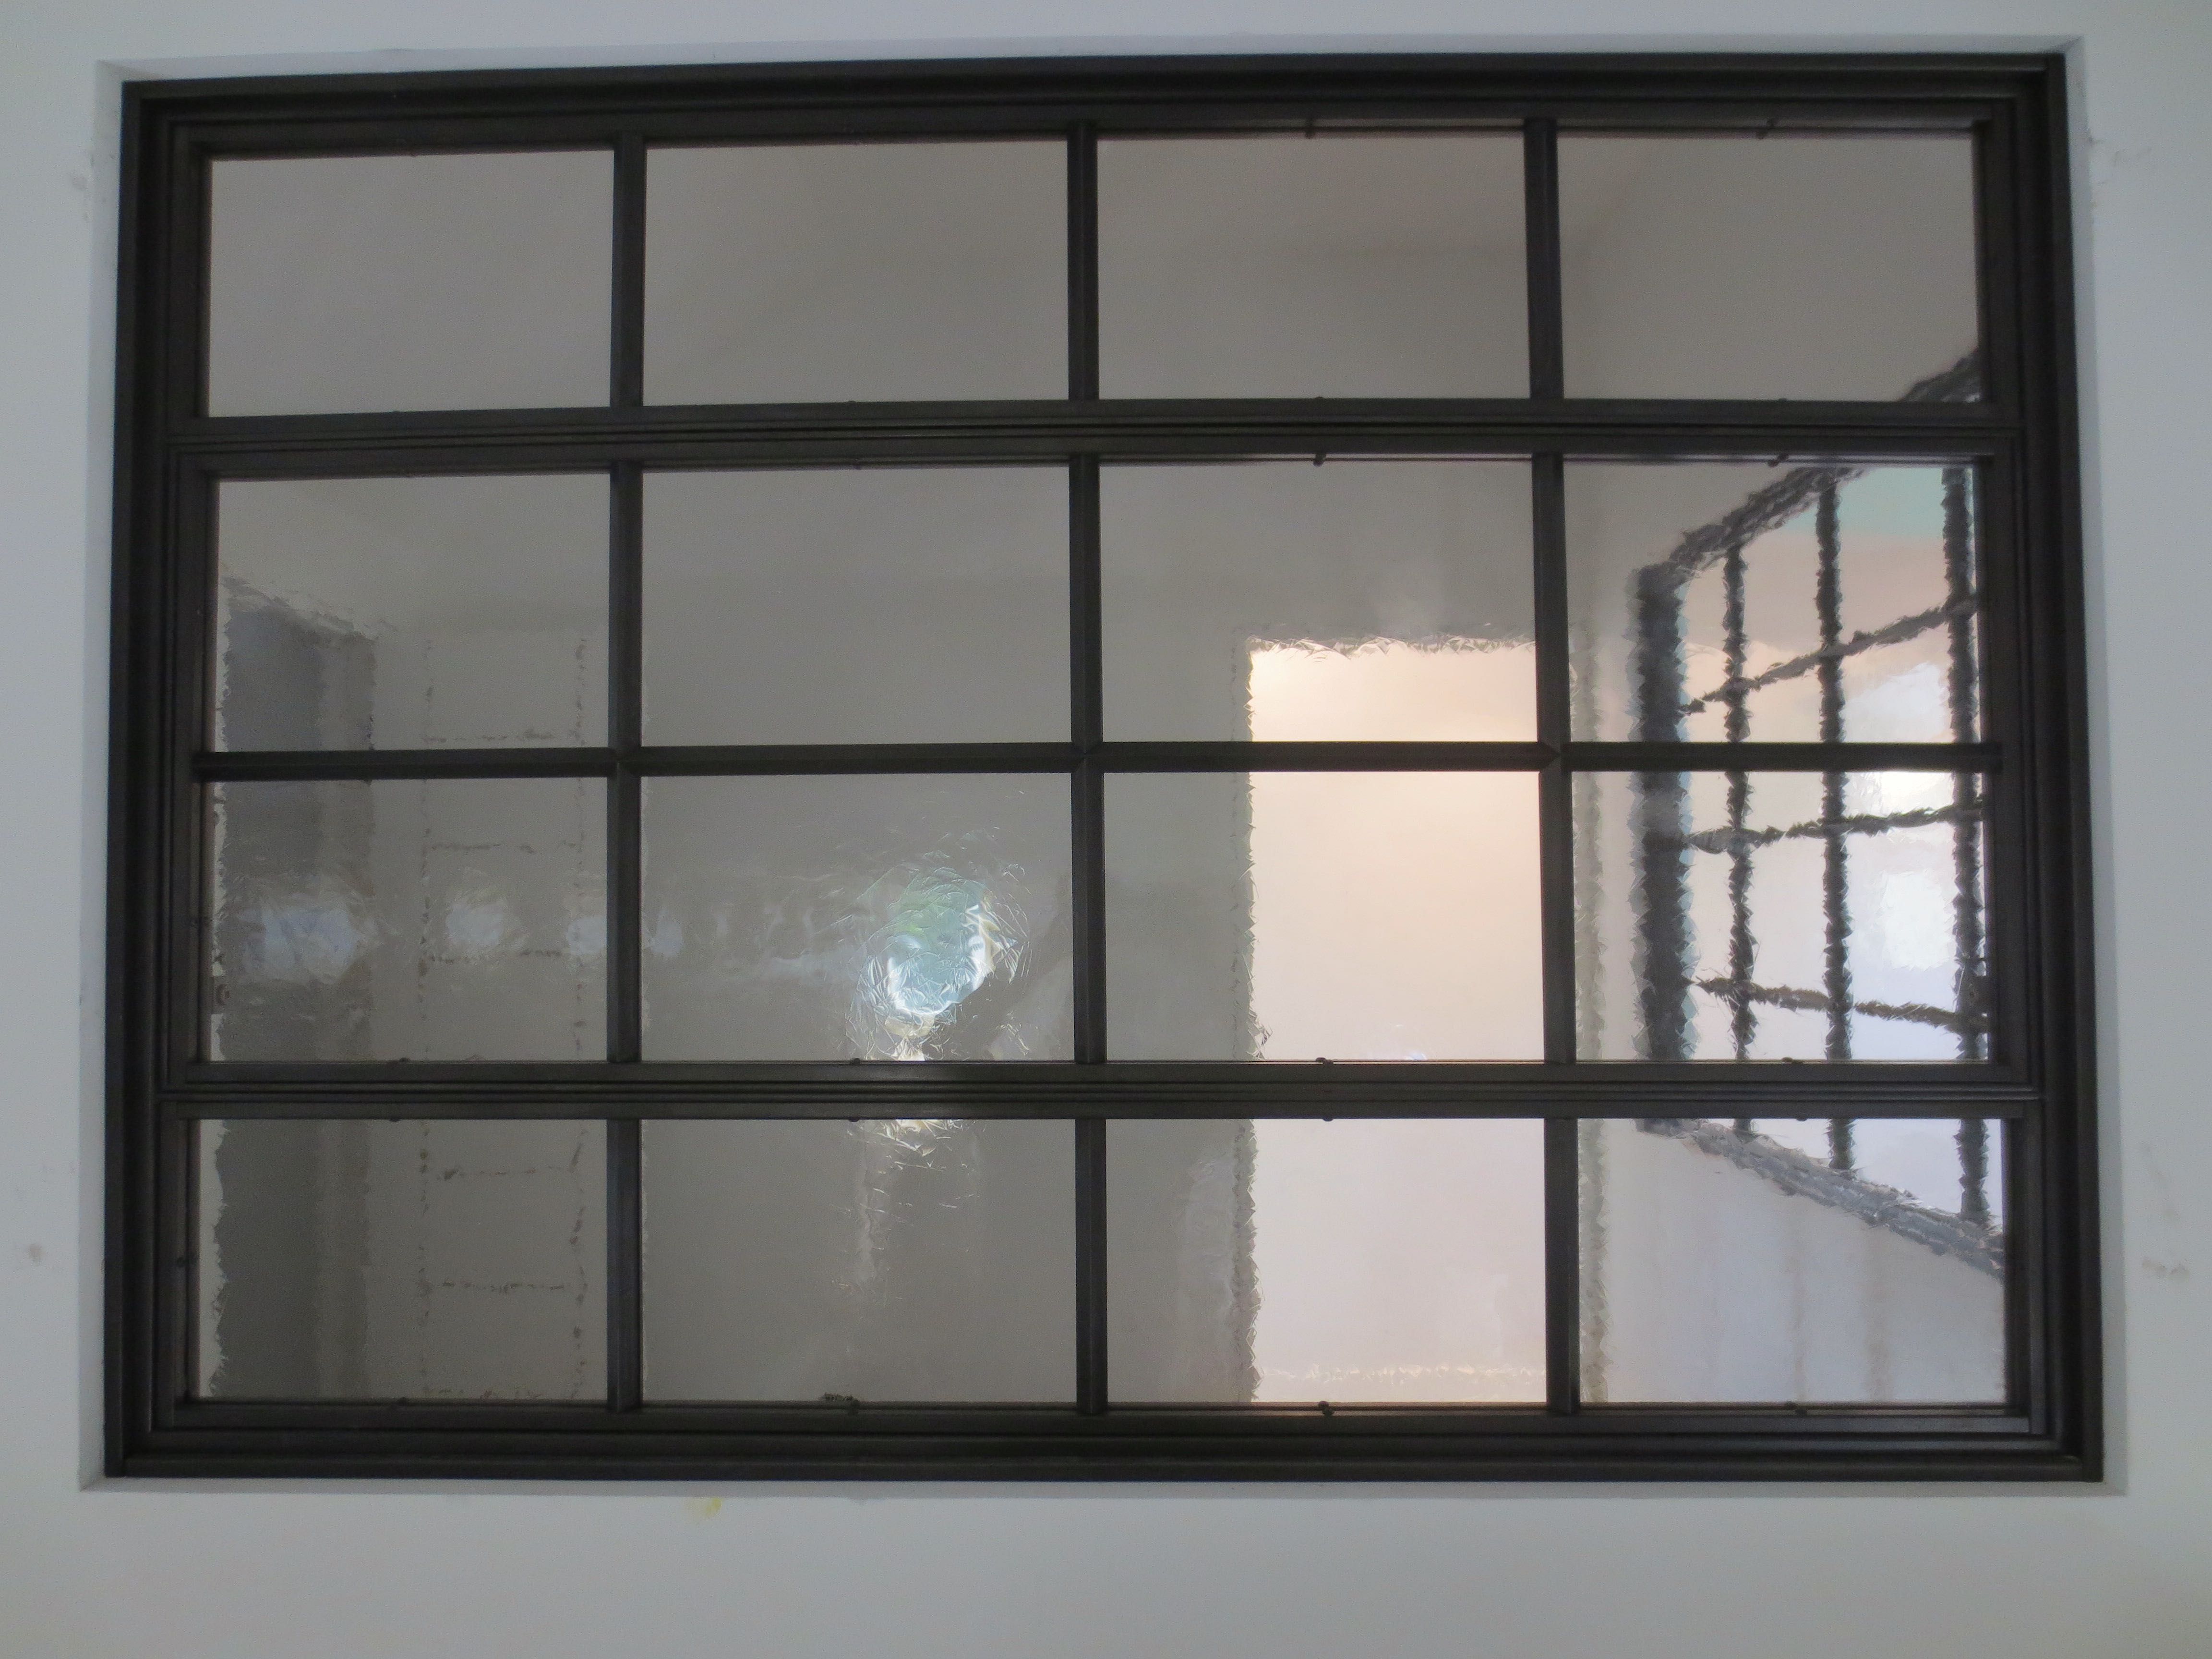 Hand Crafted Custom Steel And Glass Windows And Room Dividers By Andrew Stansell Design